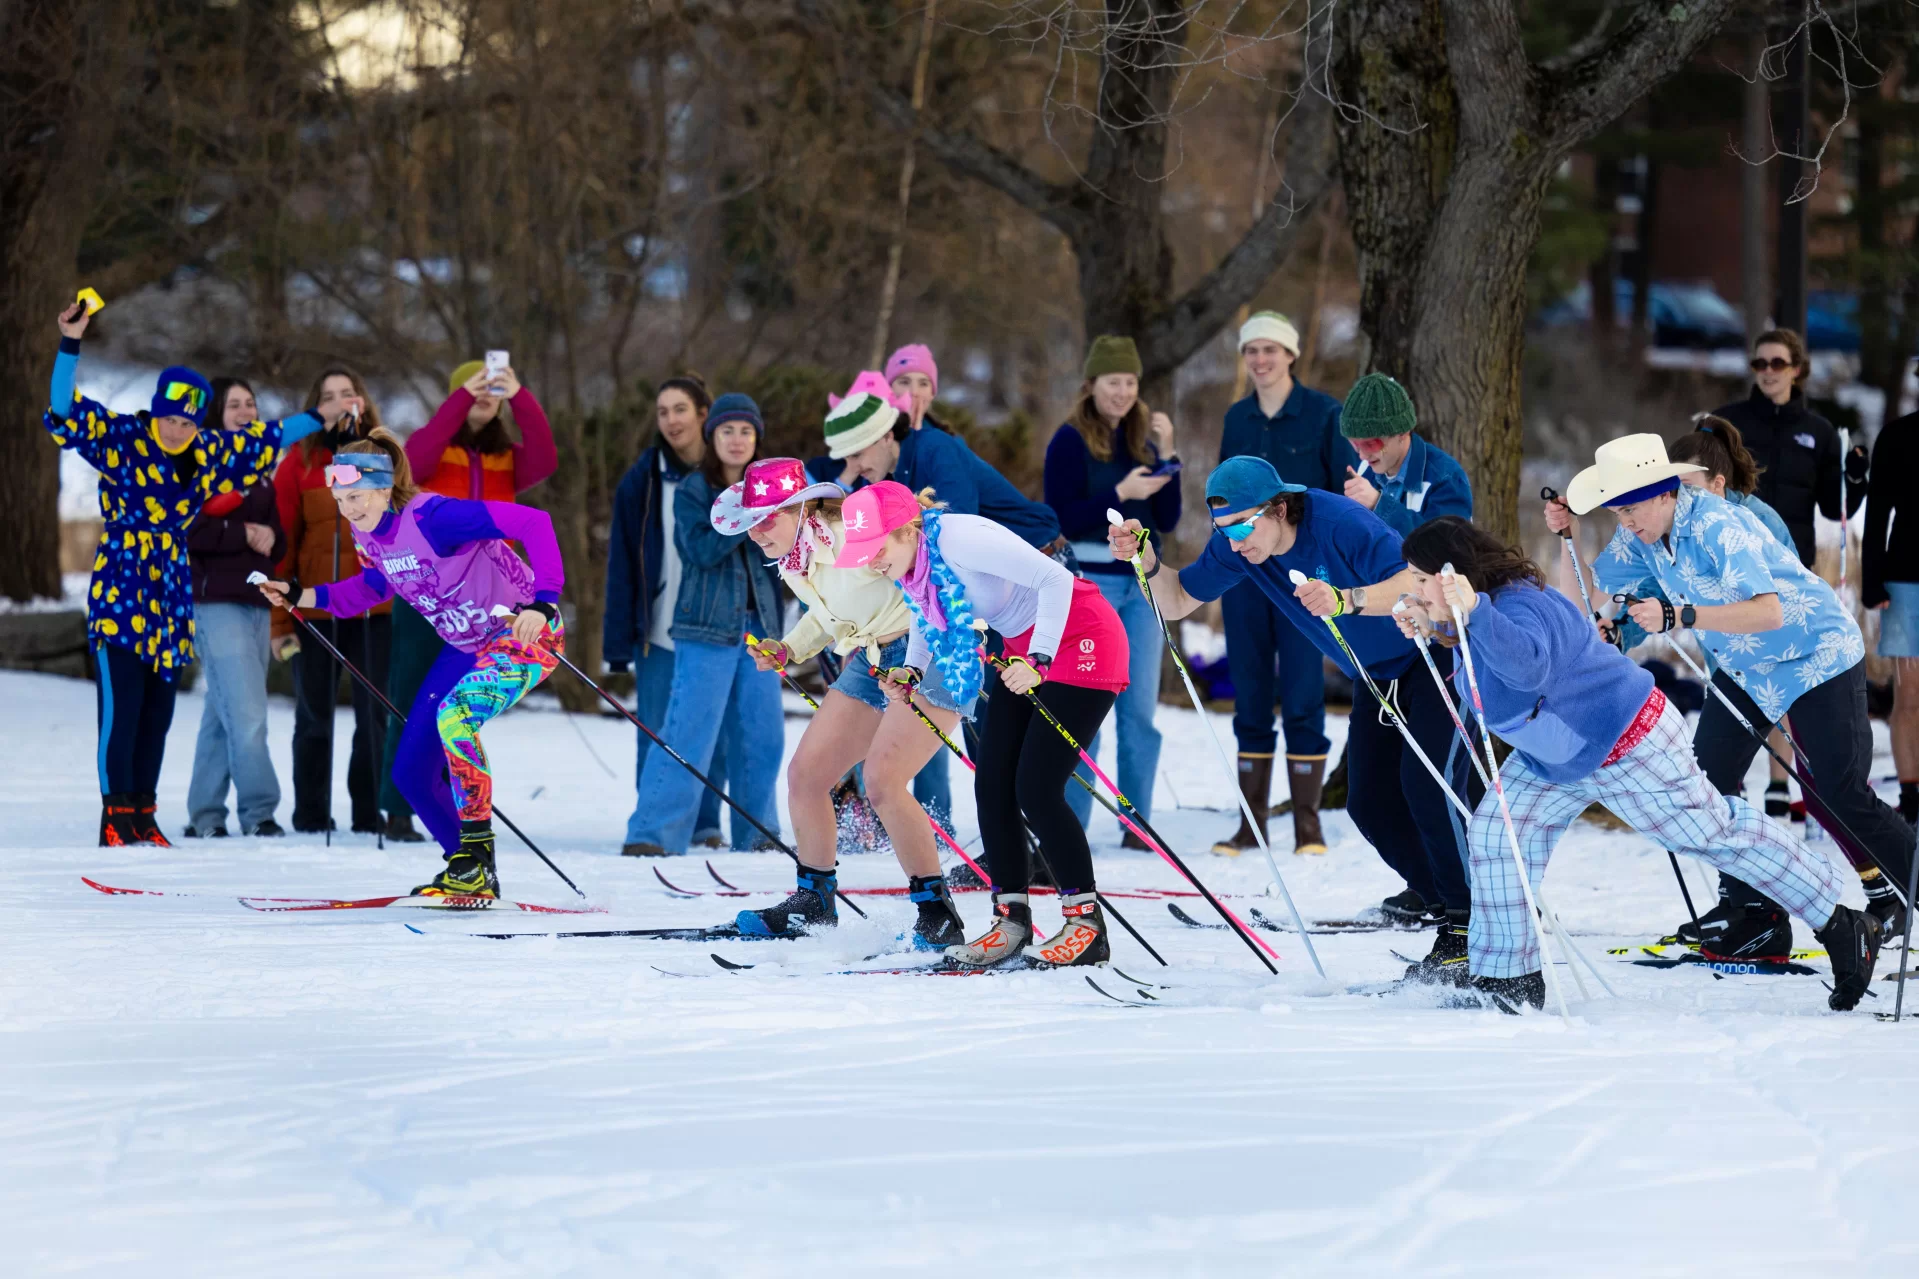 It was all about the teamwork. And the costumes.

Students who participated in the Nordic Ski Relay yesterday, Feb. 7, at Paige Field were asked to arrive with friends to create teams of four for “THE BEST SKI EVENT” of the 2024 Bates Winter Carnival.

Two pairs of skis per relay team were required. Skiers could bring their own gear or investigate the college’s Eroom to borrow. “Other forms of free-heeled skis are acceptable if you must,” the co-sponsors @batesnordic and @batesoutingclub noted.

“Picture this: you, glitter, flair, stoke, snow, falling, (healthy?) competition, a skinny ski relay. You thought Lost Valley takeover was unbeatable, you thought wrong.”